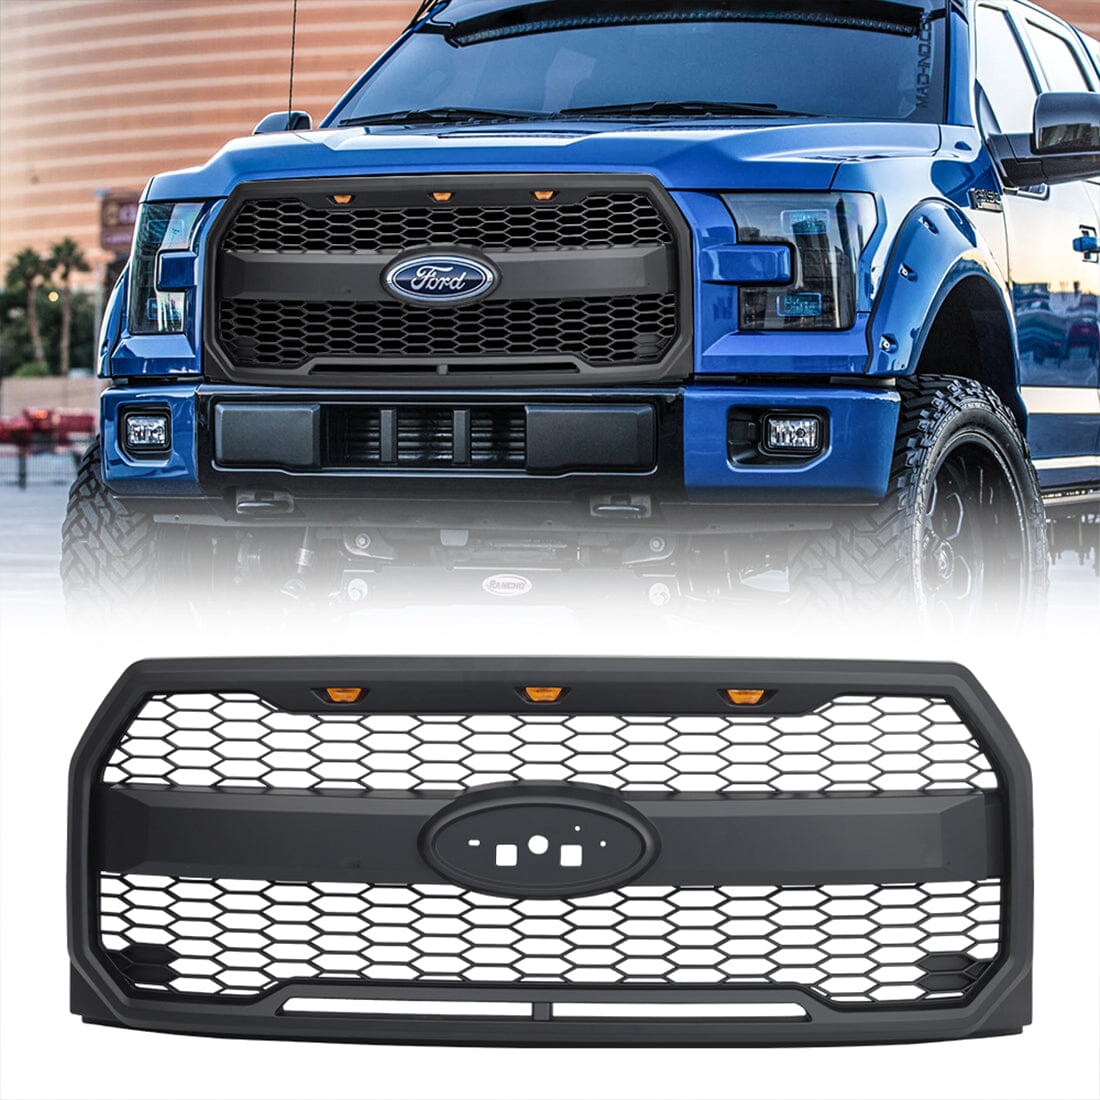 Raptor Style Mesh Grille W/Amber Lights & Labeled bracket For 2015-2017 Ford F150 | Amoffroad